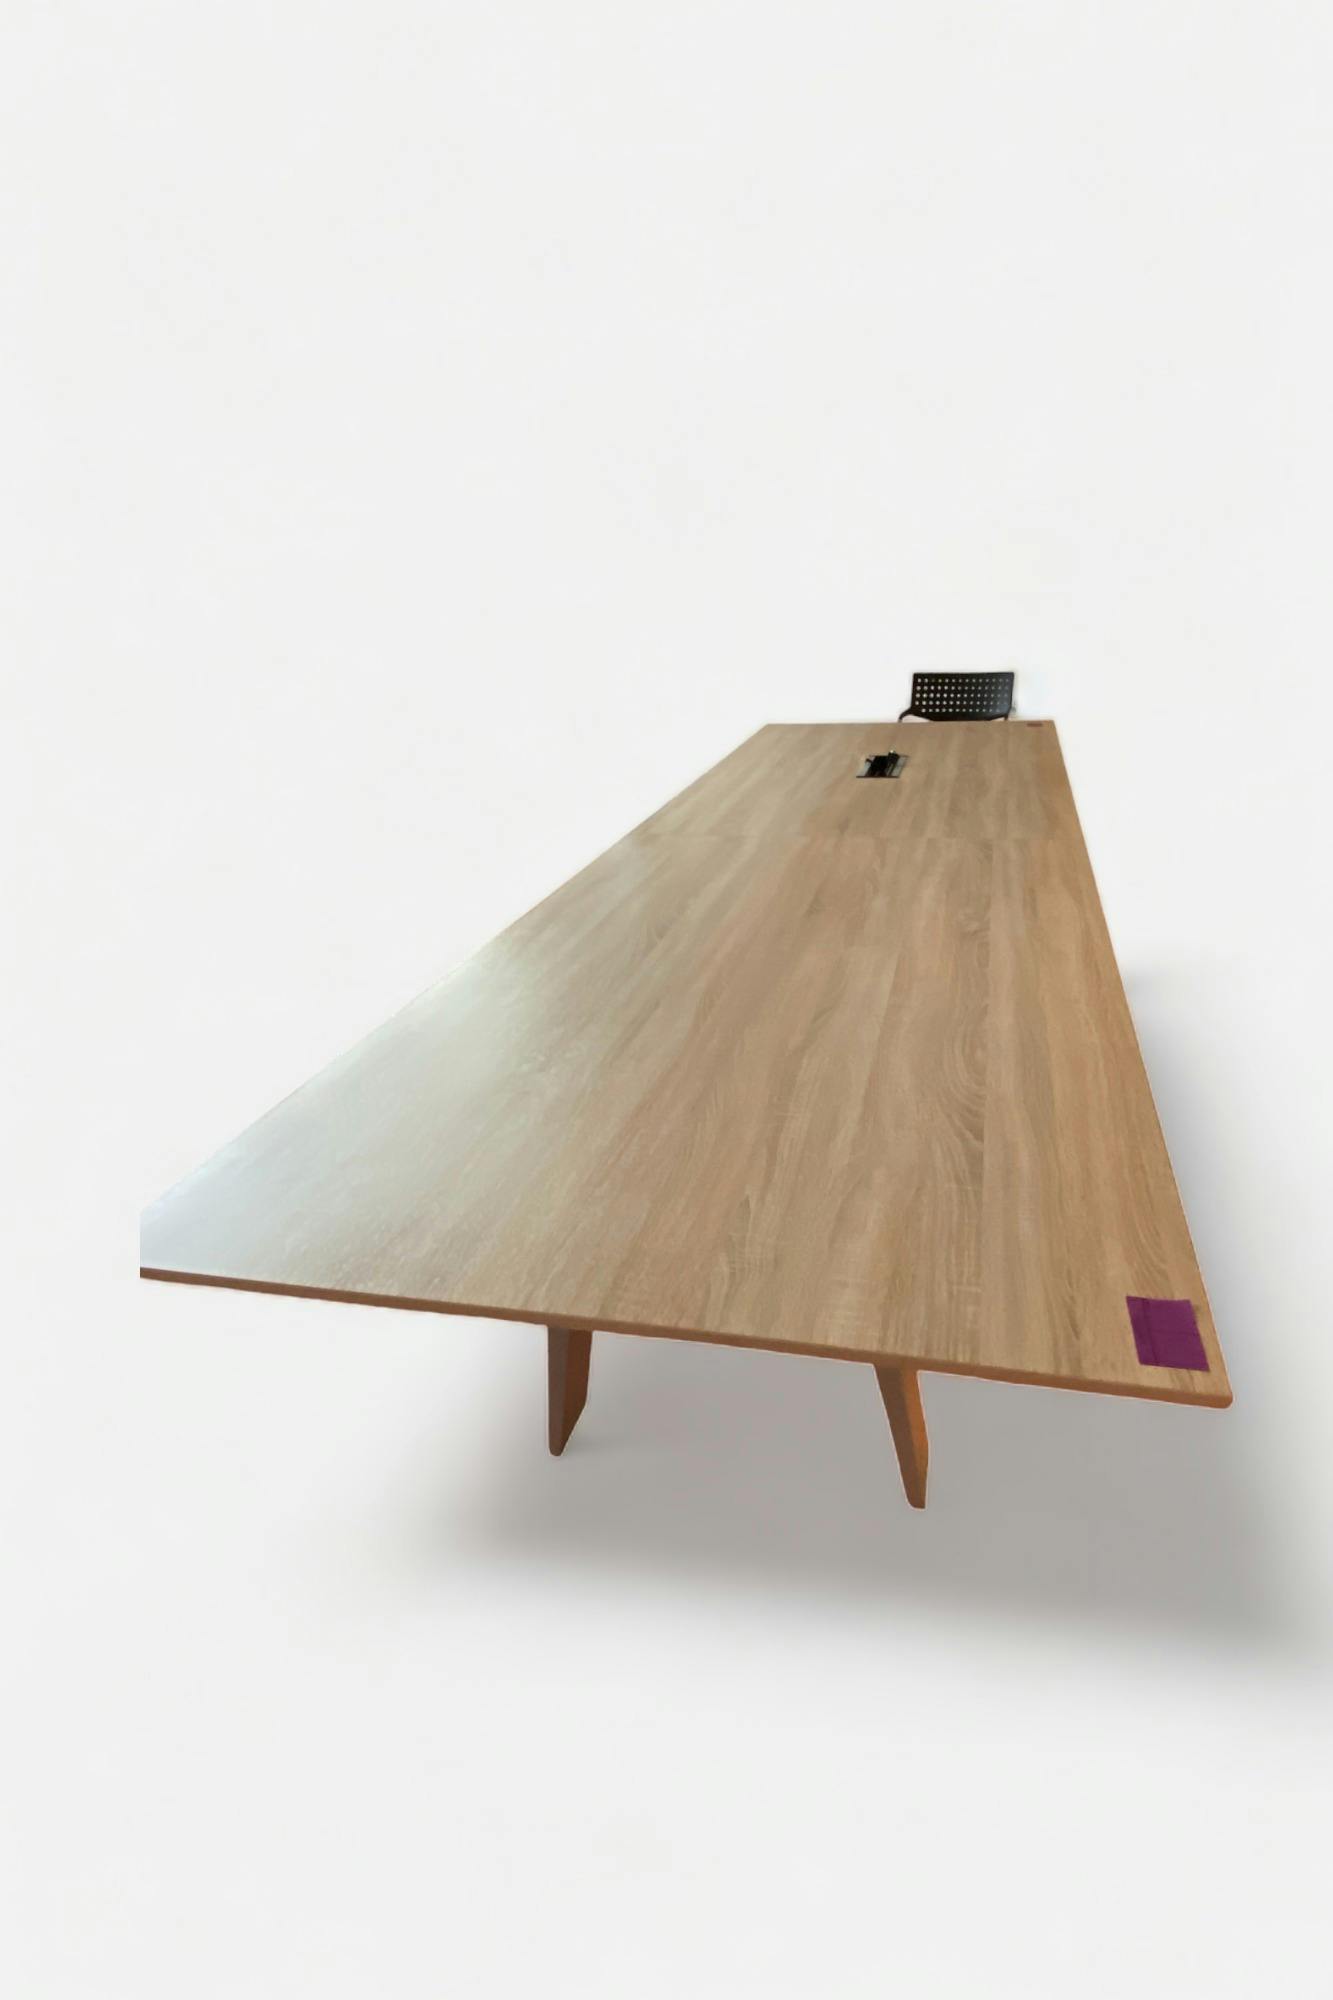 400cm wood meeting table - Relieve Furniture